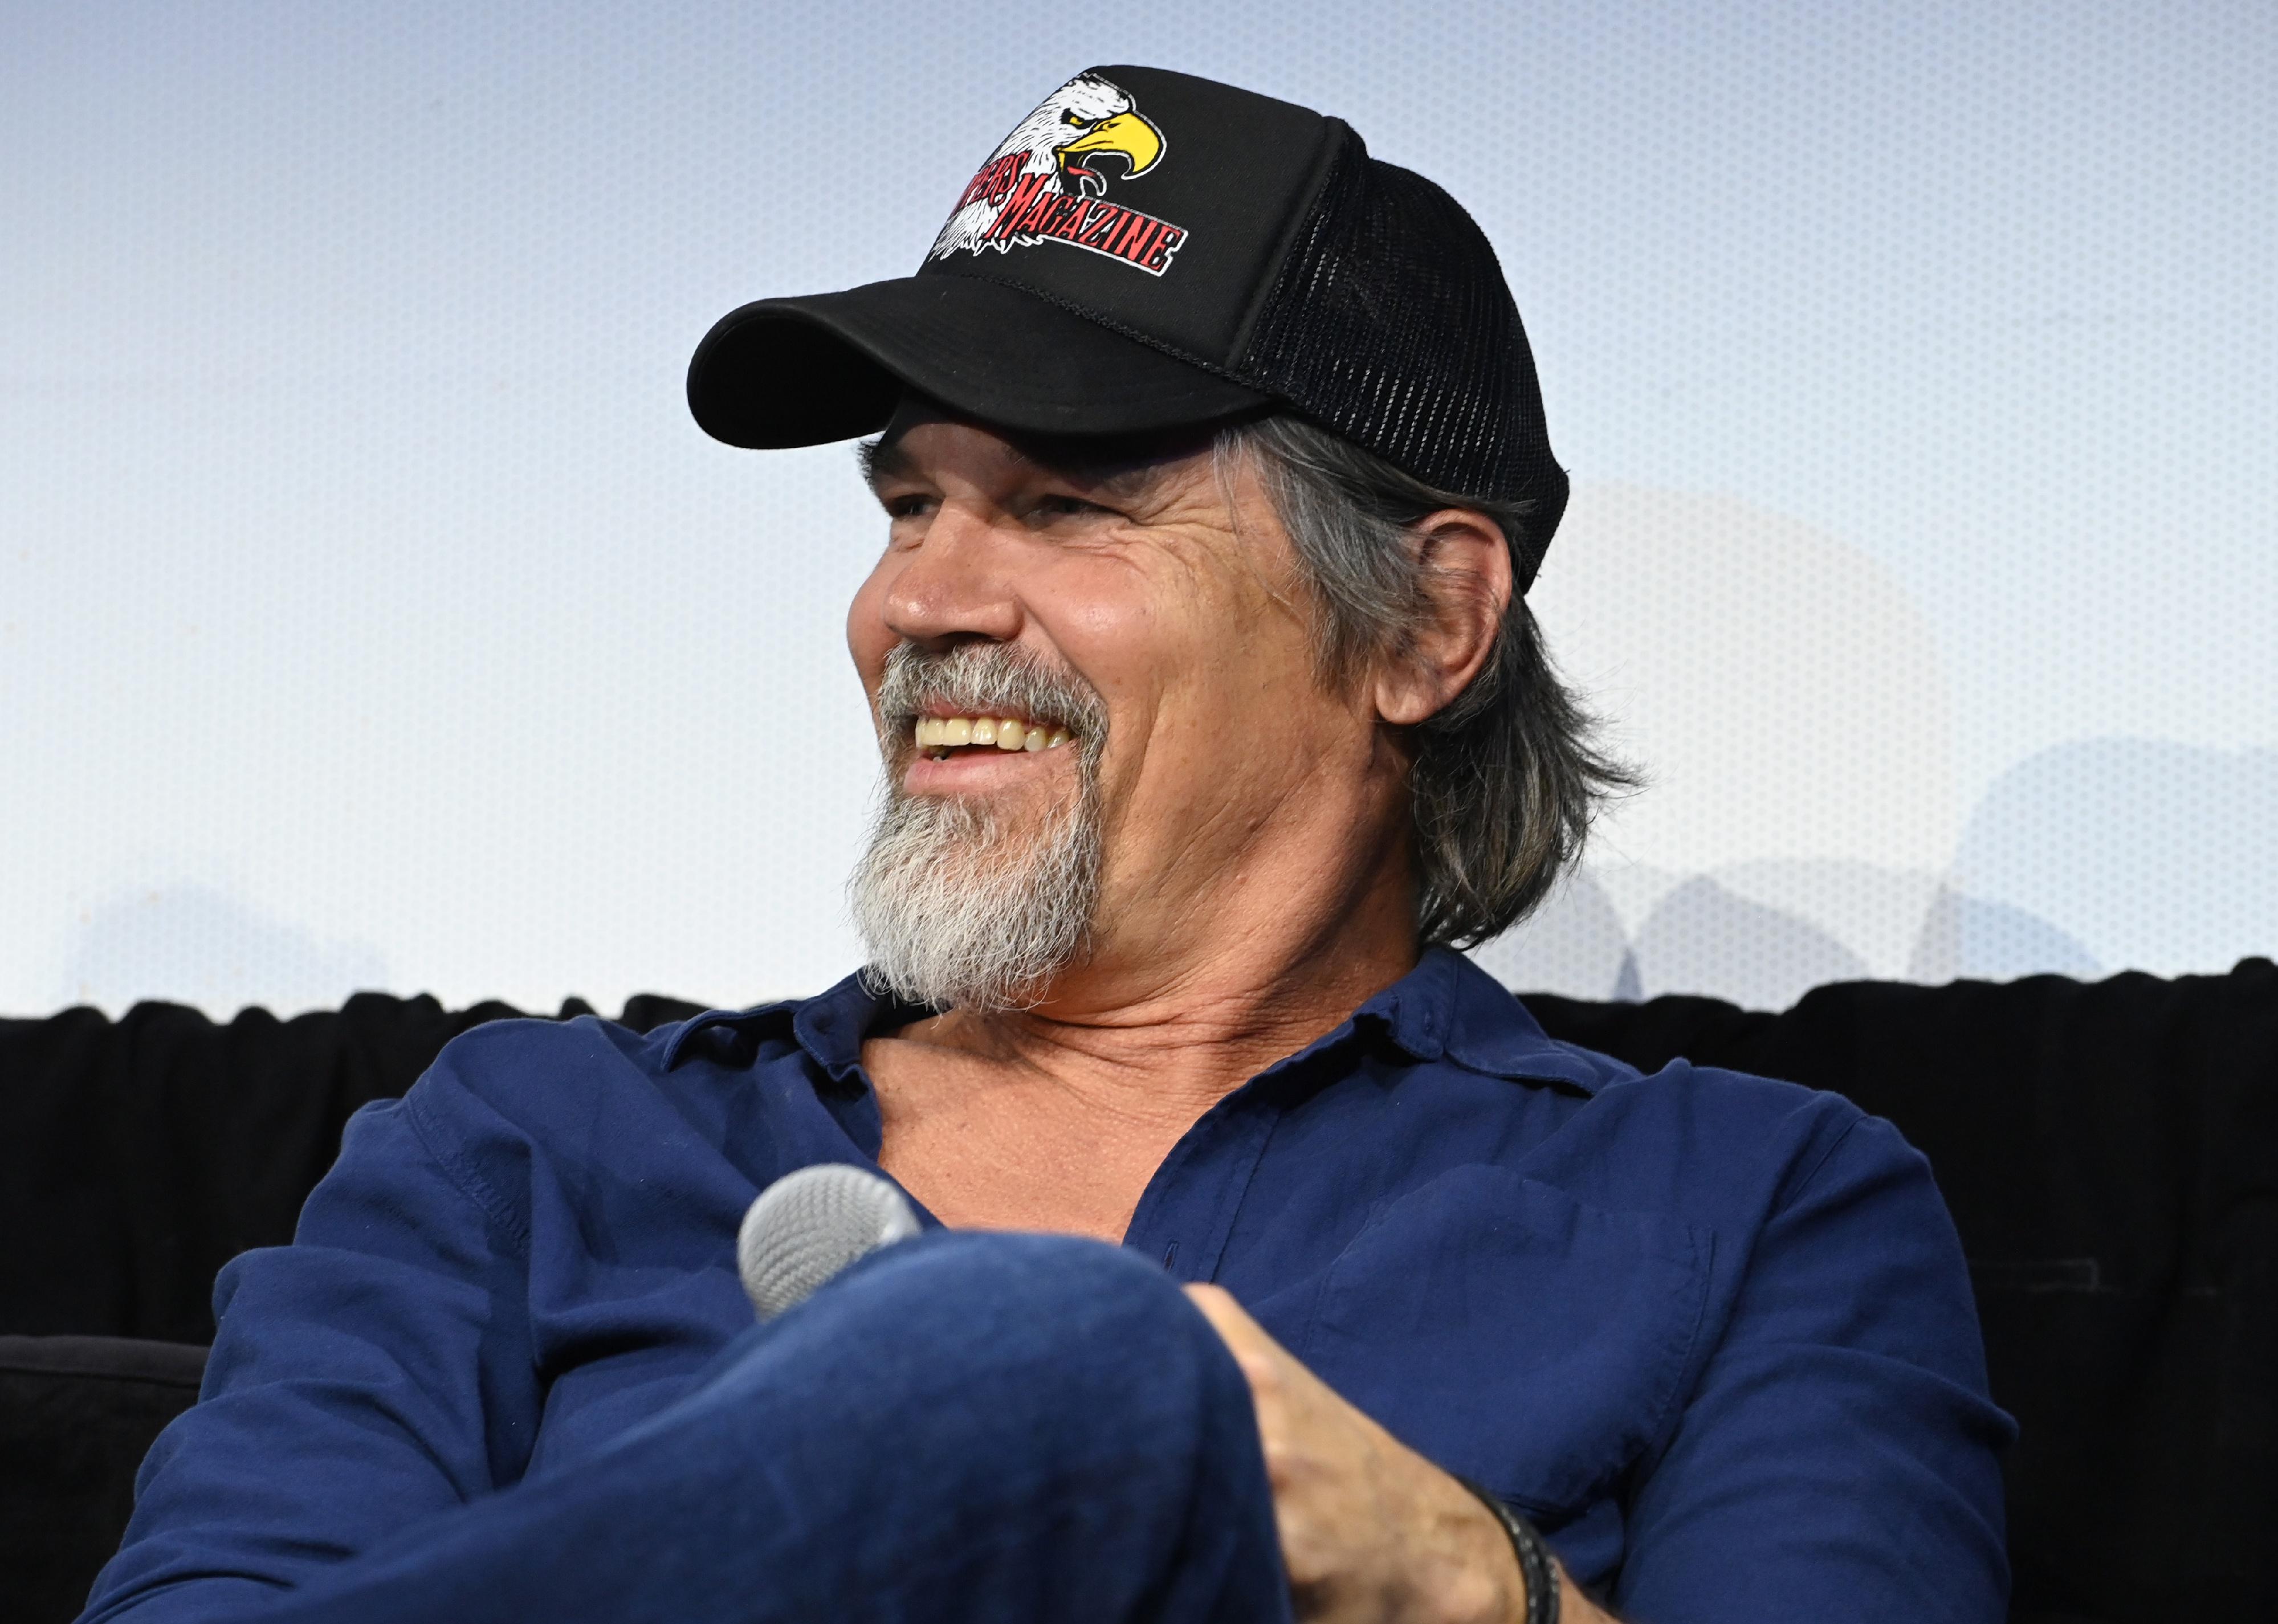 Josh Brolin onstage in a blue shirt and black trucker hat.